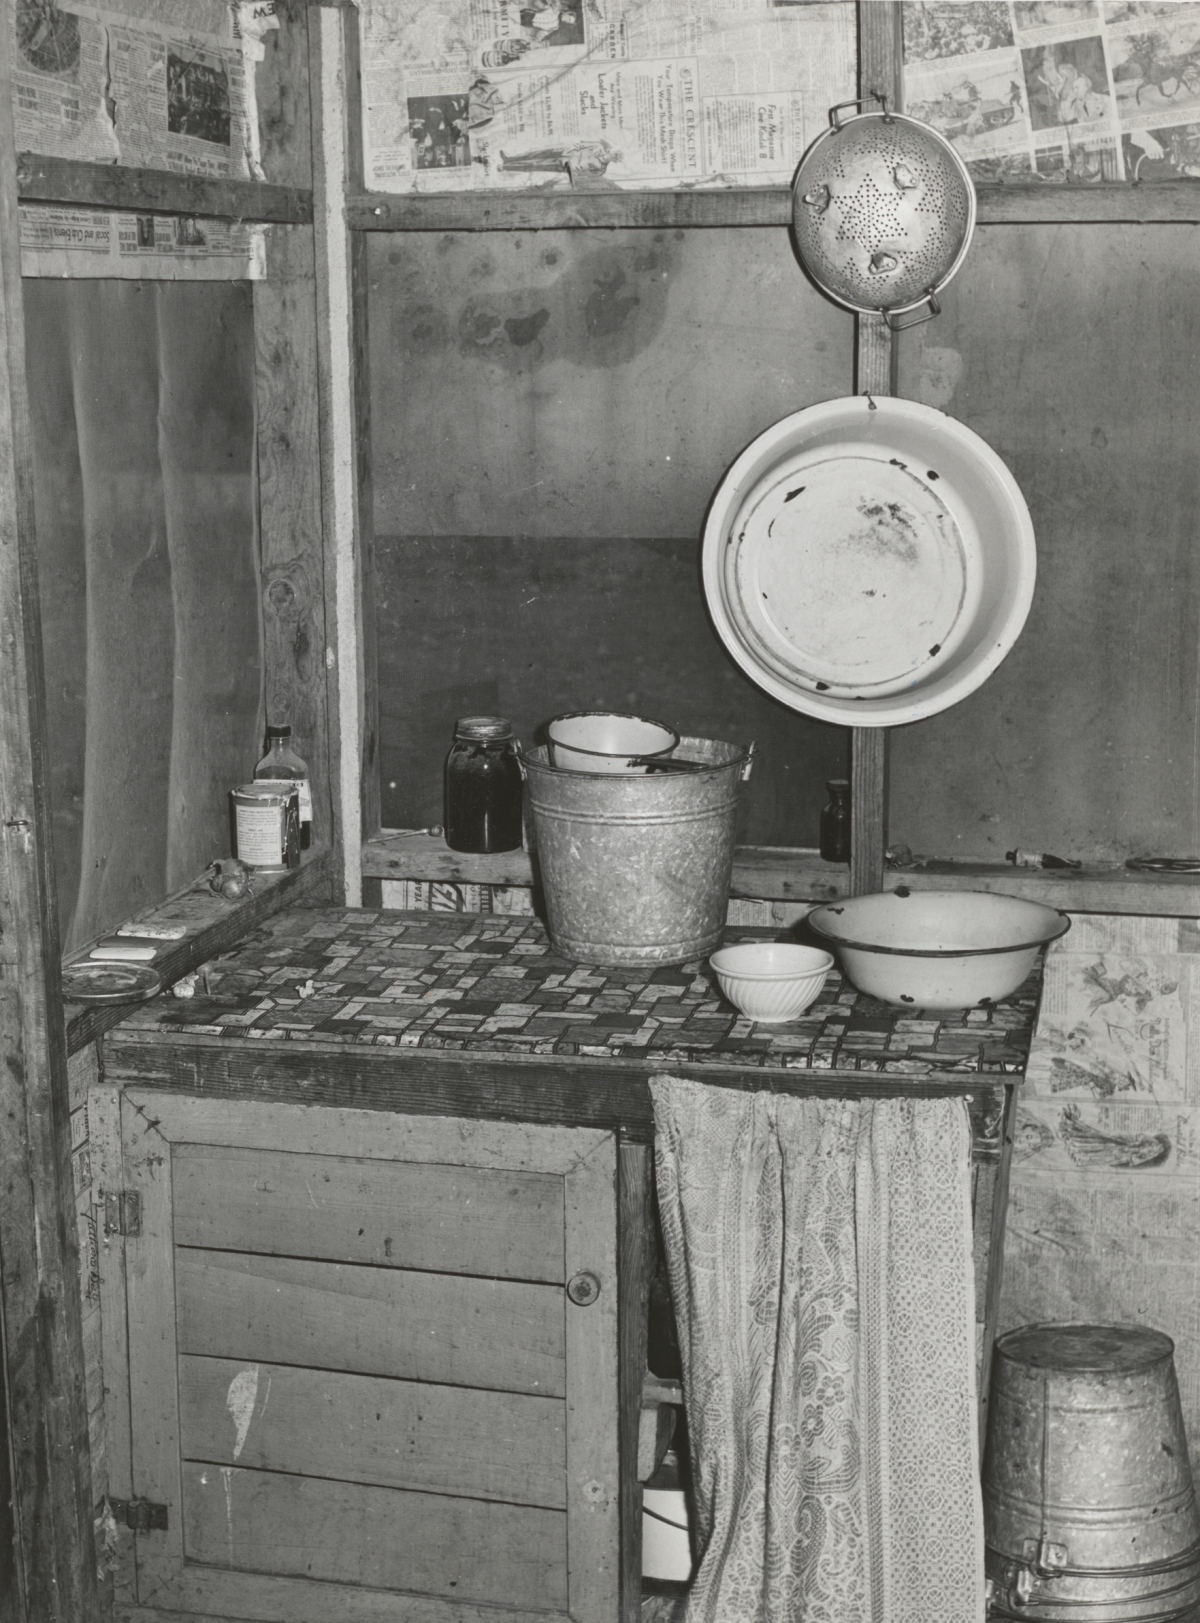 dishwashing area in 19603s house with no sink or running water